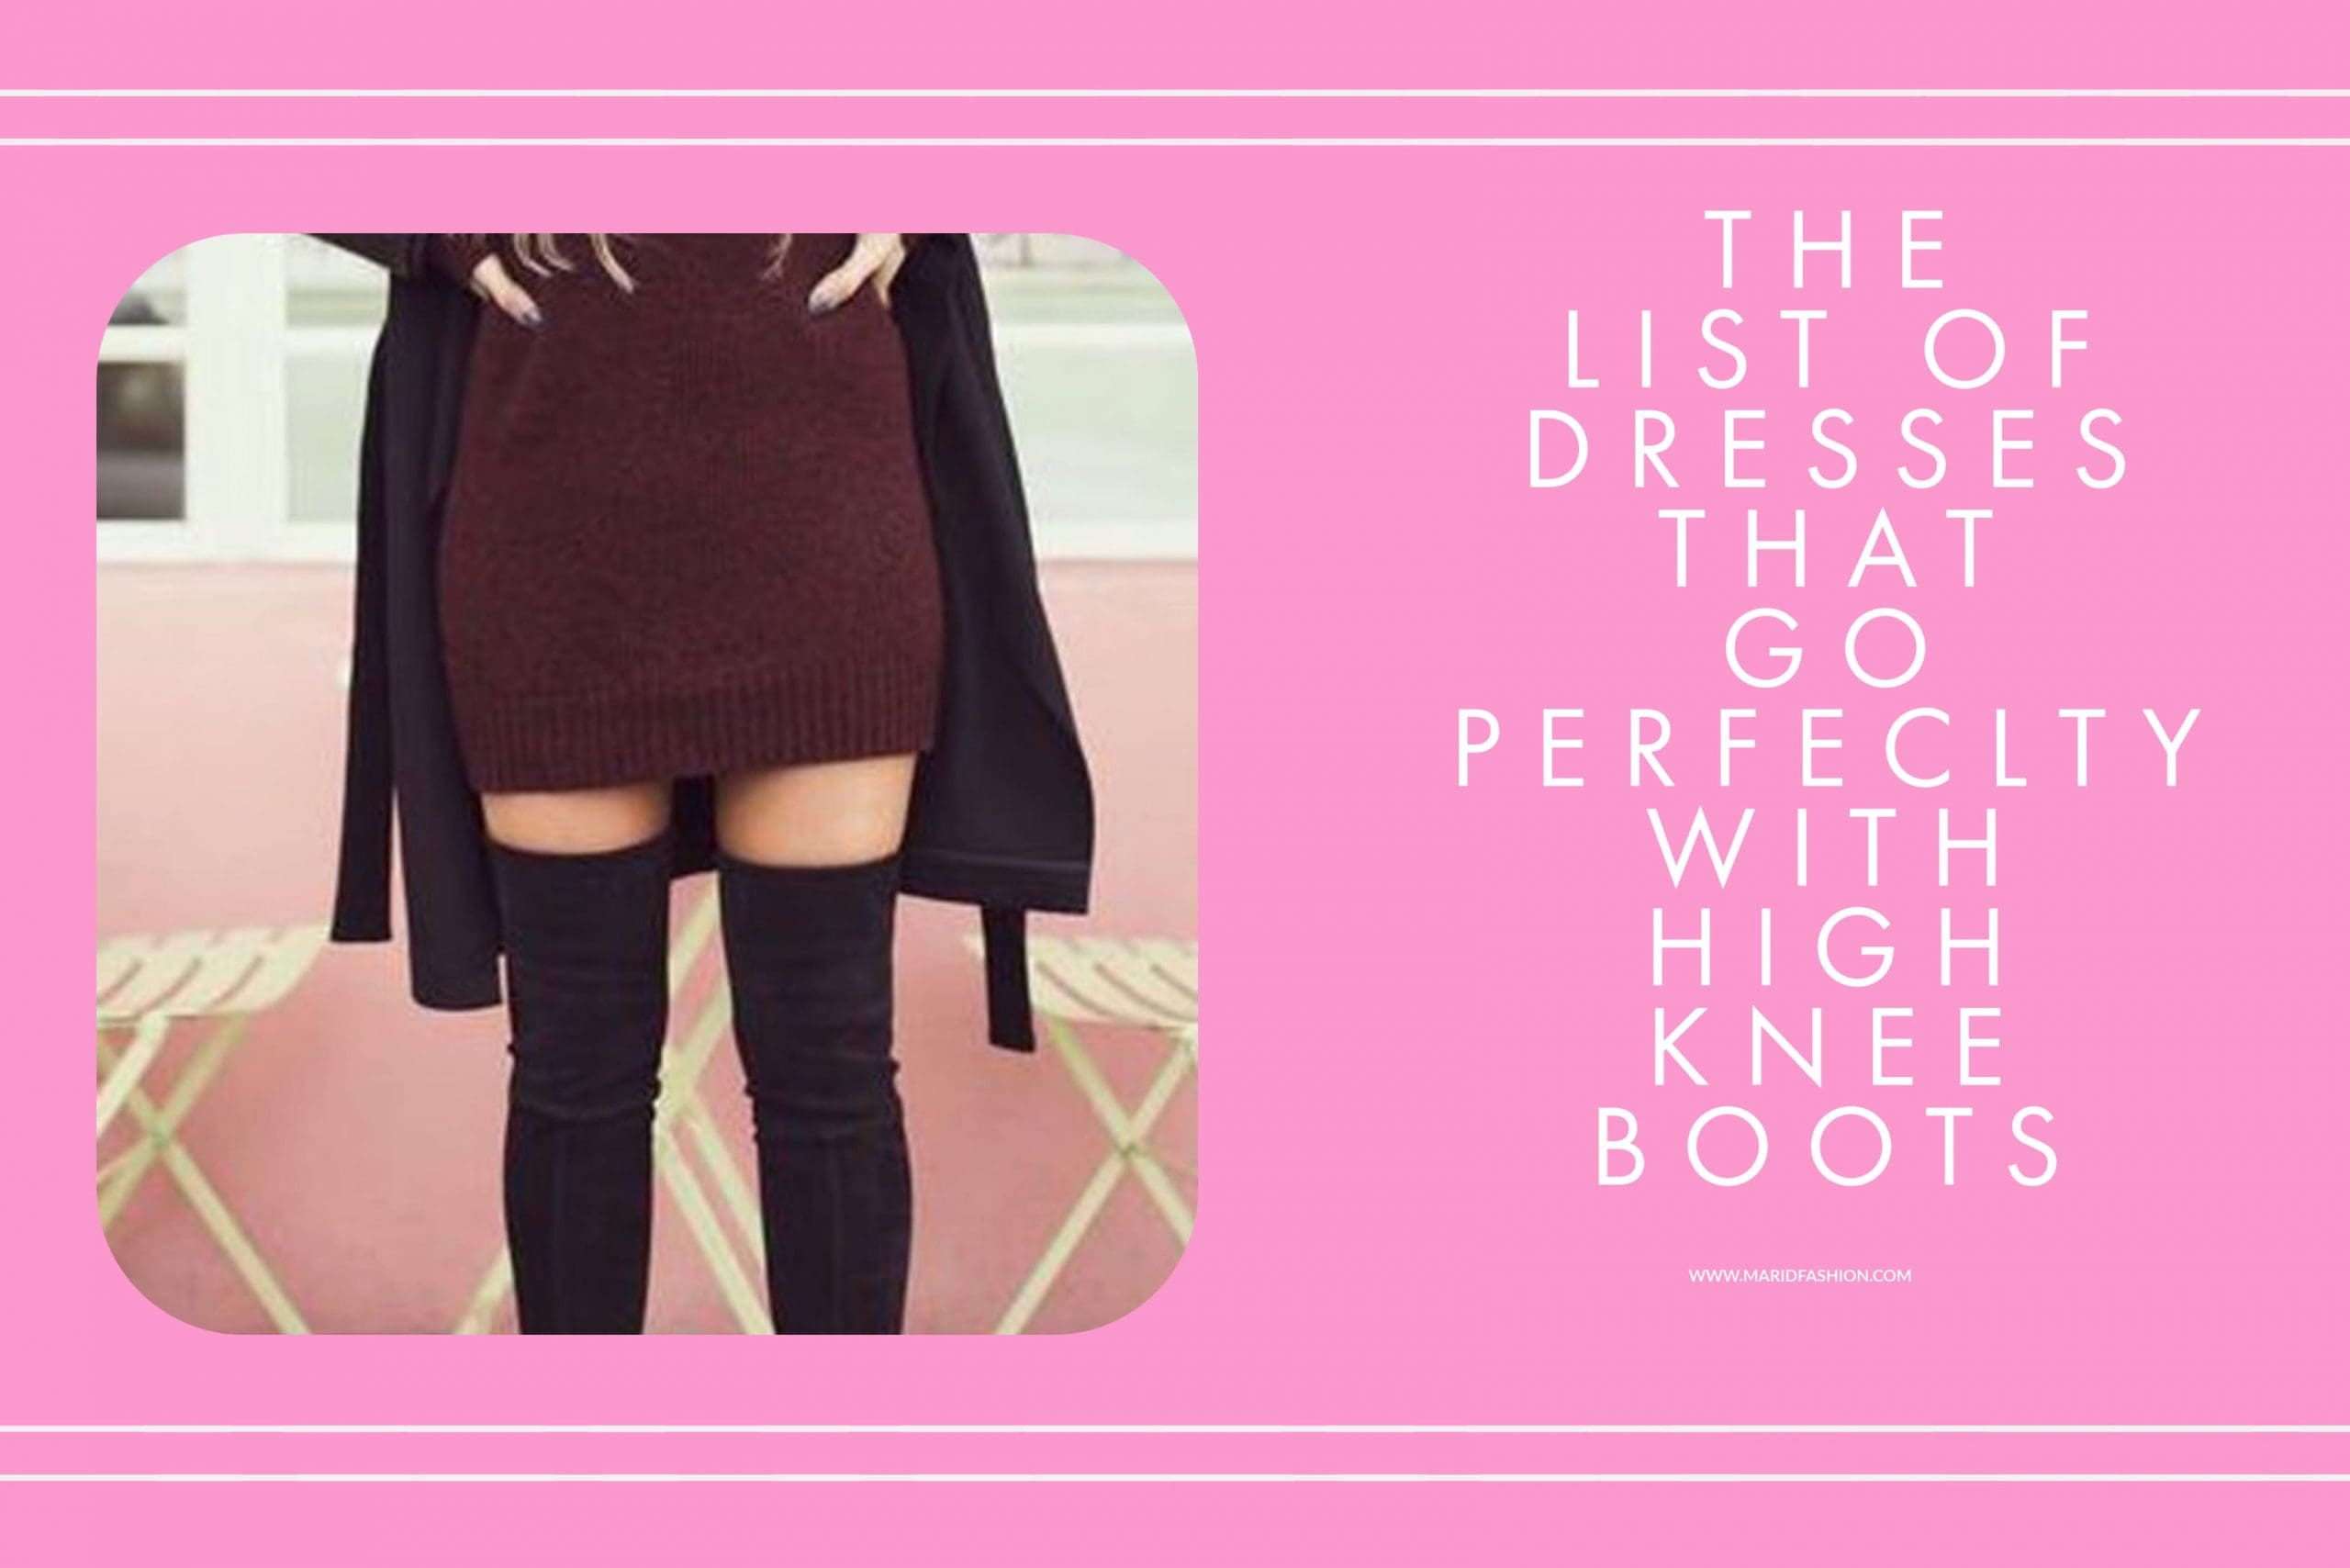 How to Find the Right Dresses to Wear With Knee High Boots